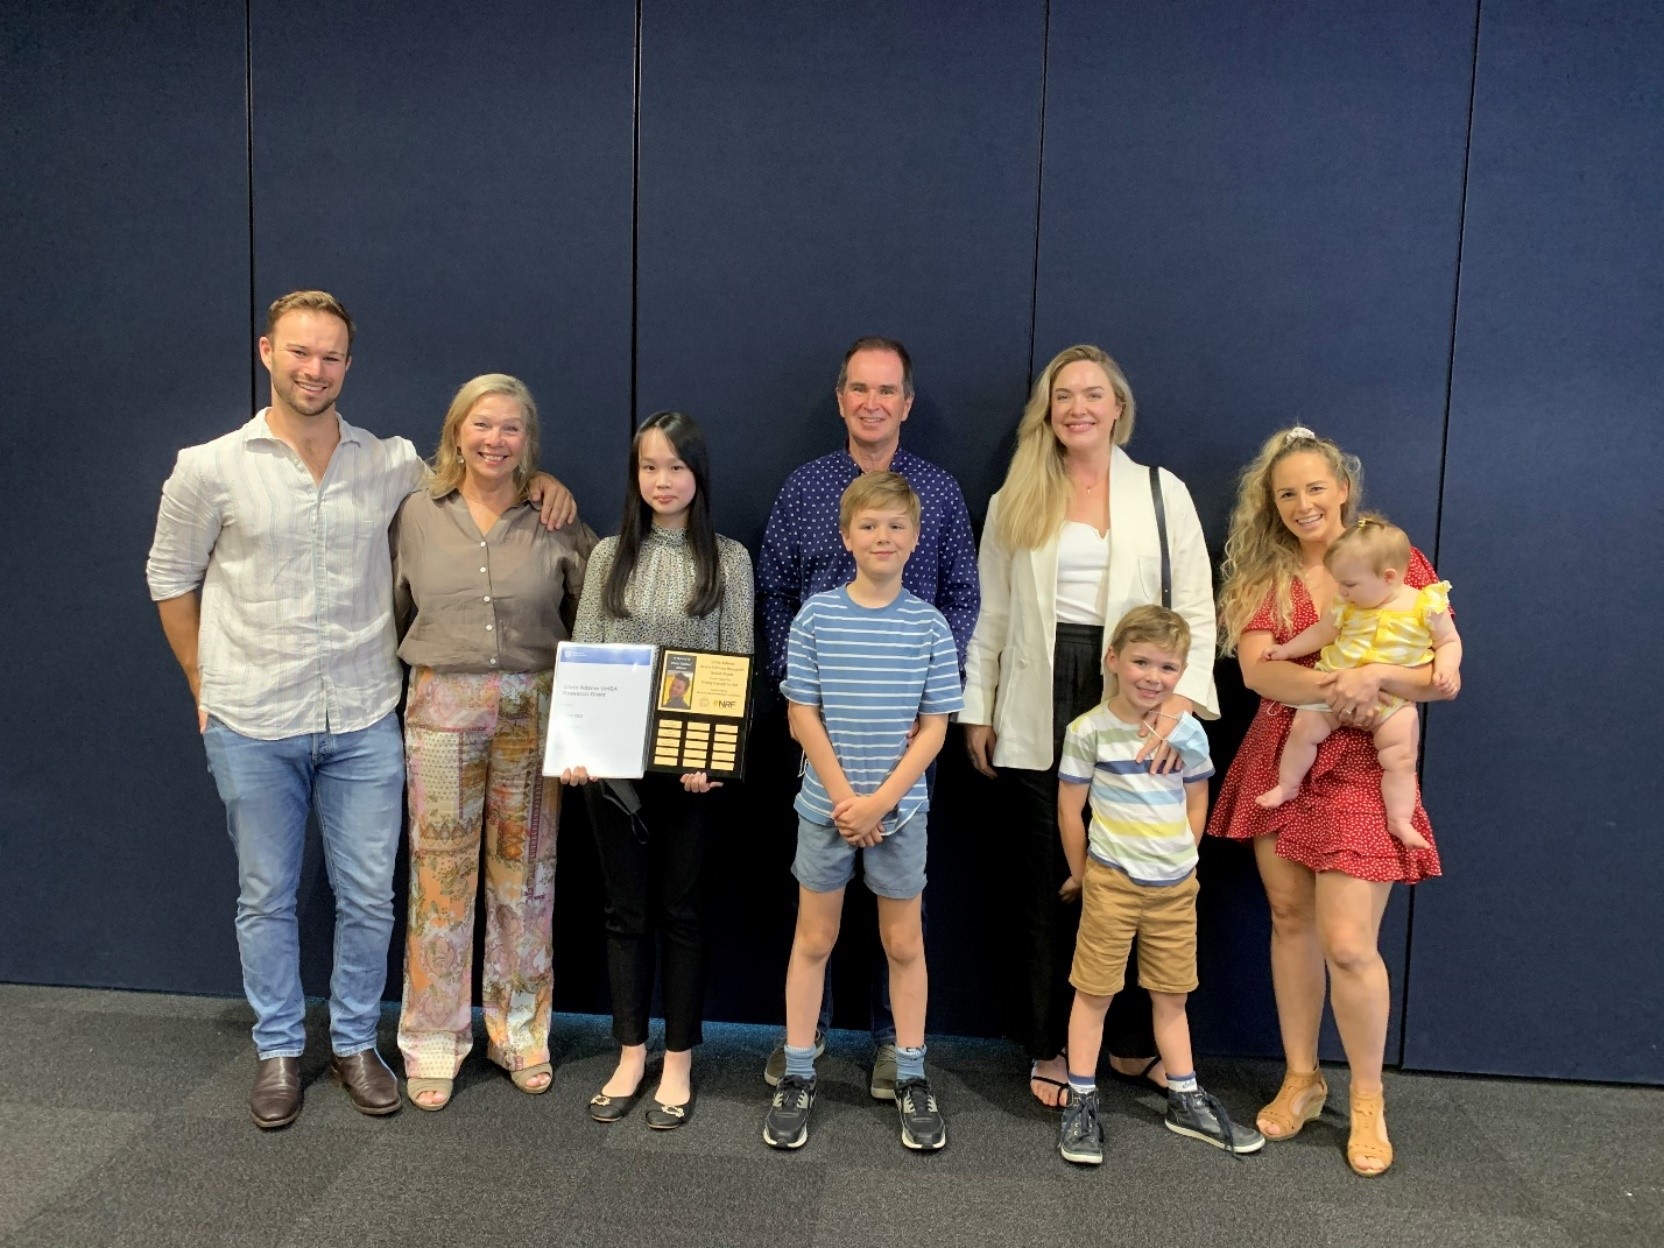 Chris Adams’s brother, mother, father, sisters-in-law, niece and nephews at the 2021 Chris Adams UniSA Research Grant presentation with researcher Erica Yeo (second to left).